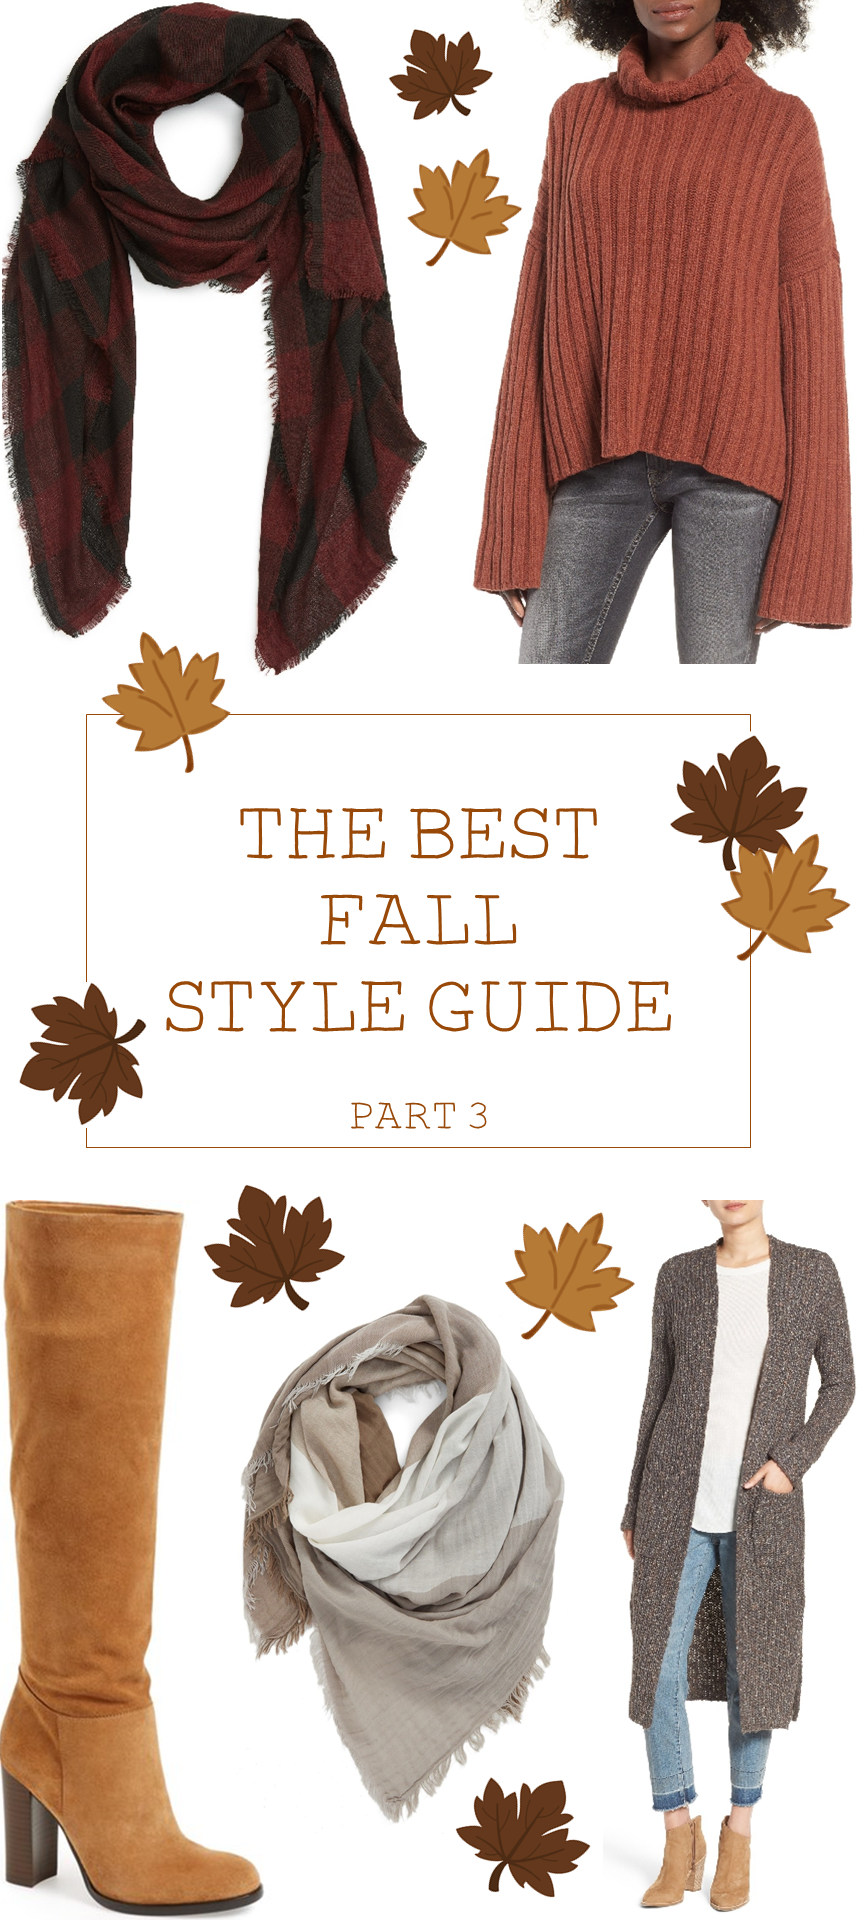 THE BEST FALL STYLE GUIDE PART 3 - Beautifully Seaside